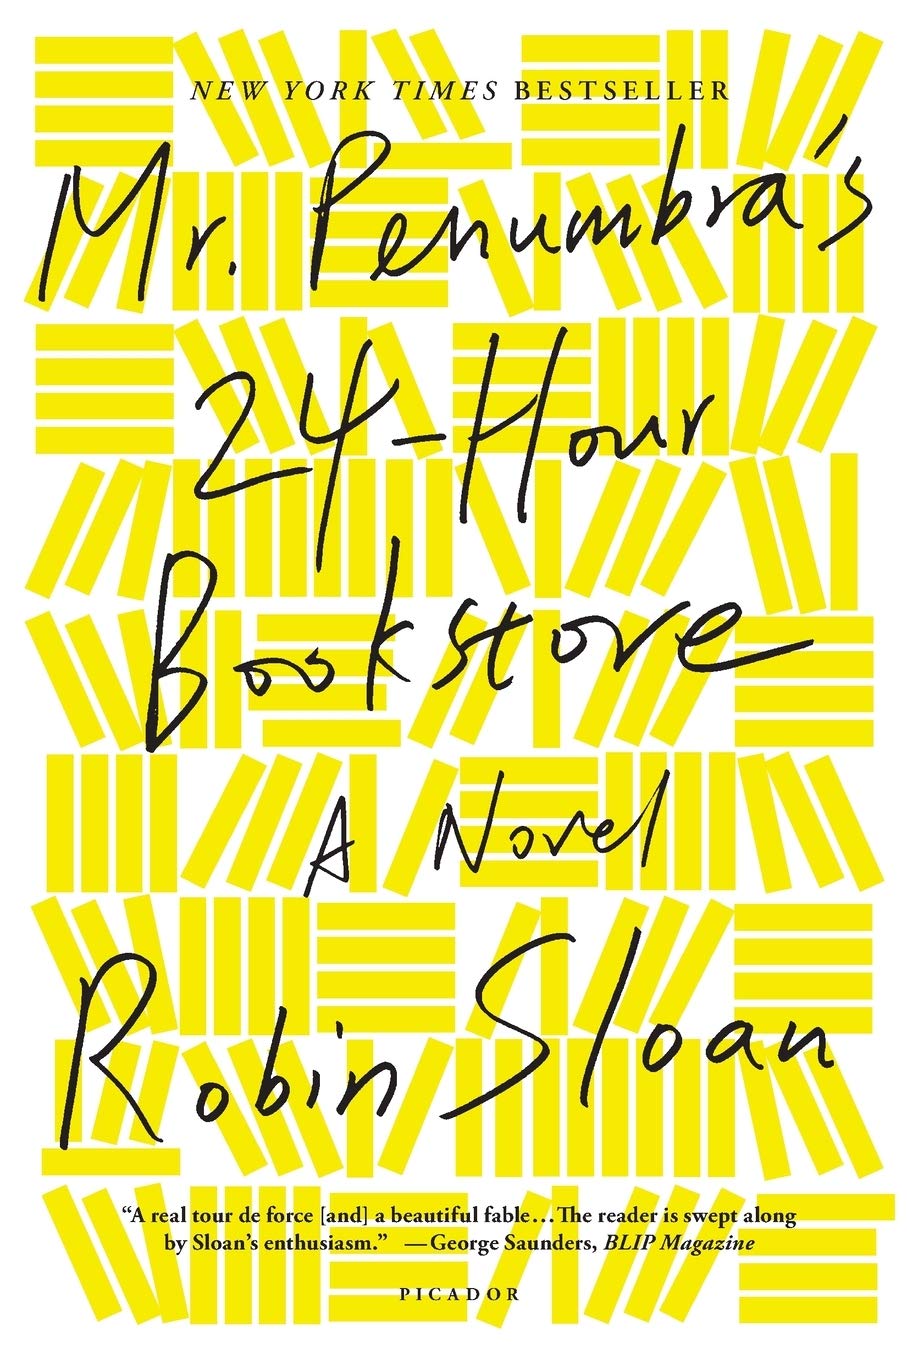 Cover of Mr. Penumbra's 24-Hour Bookstore by Robin Sloan